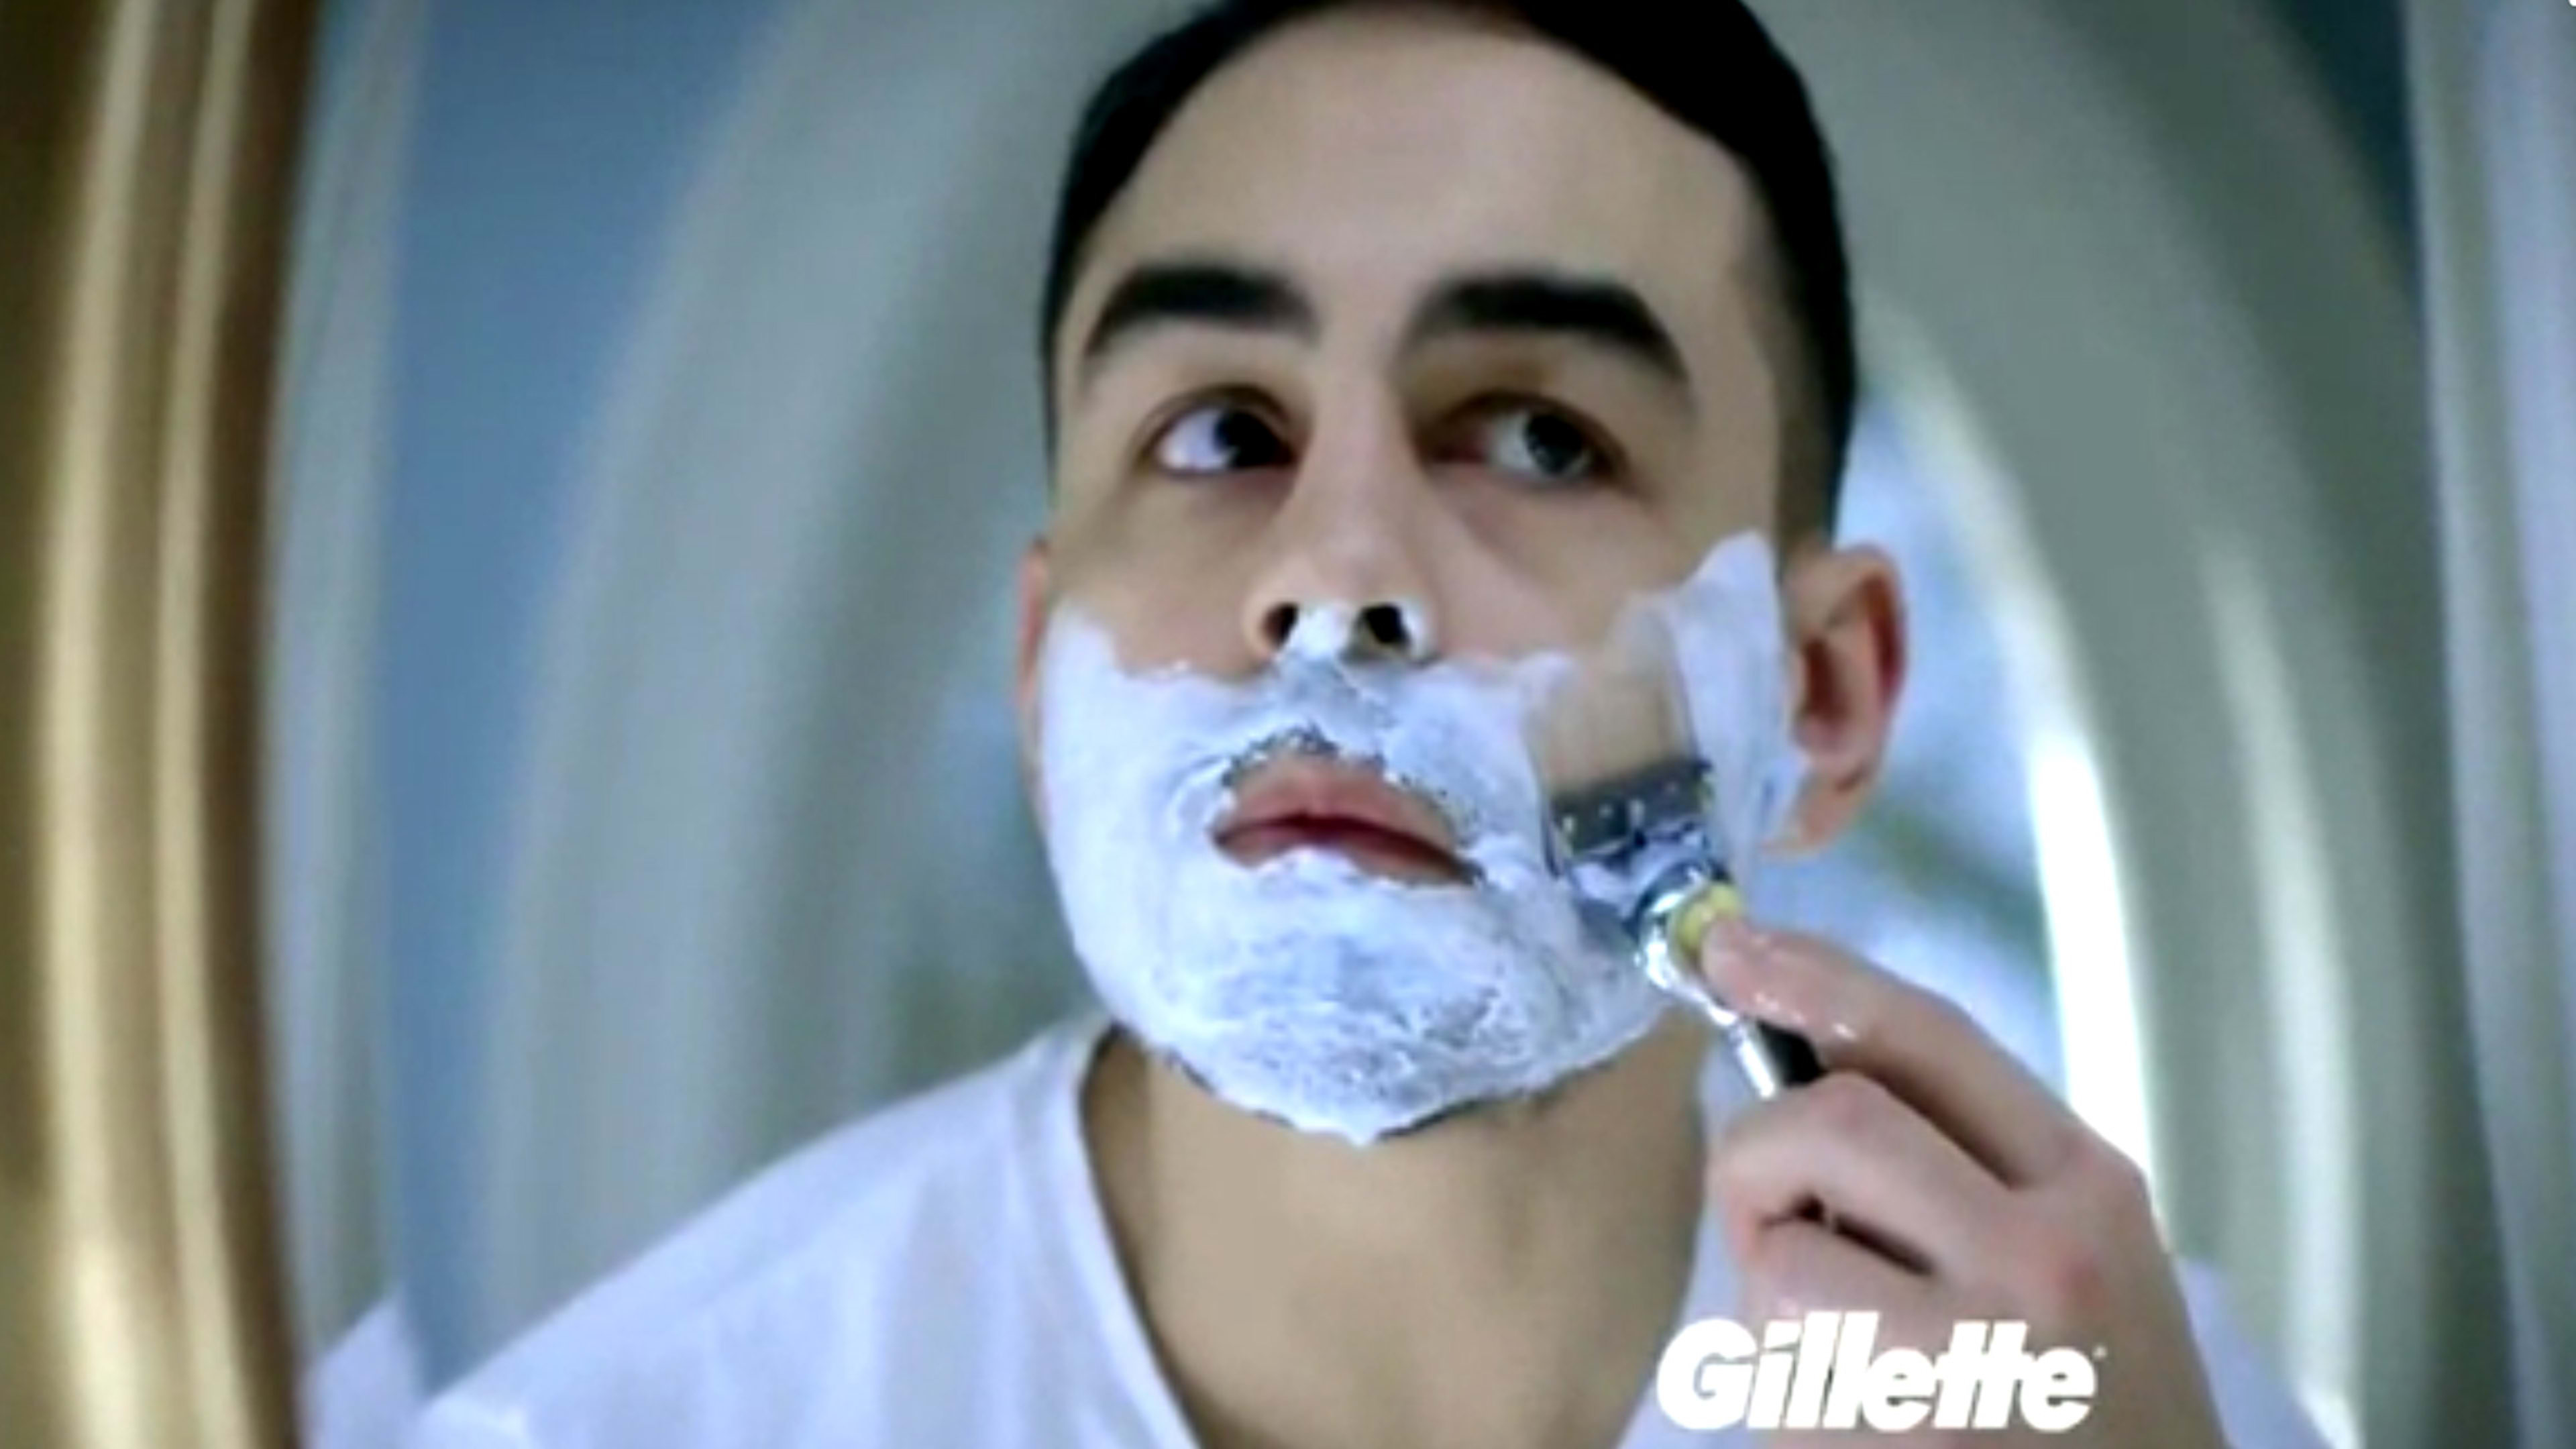 A watchdog group says Gillette’s “Boston made” ad campaign is deceptive